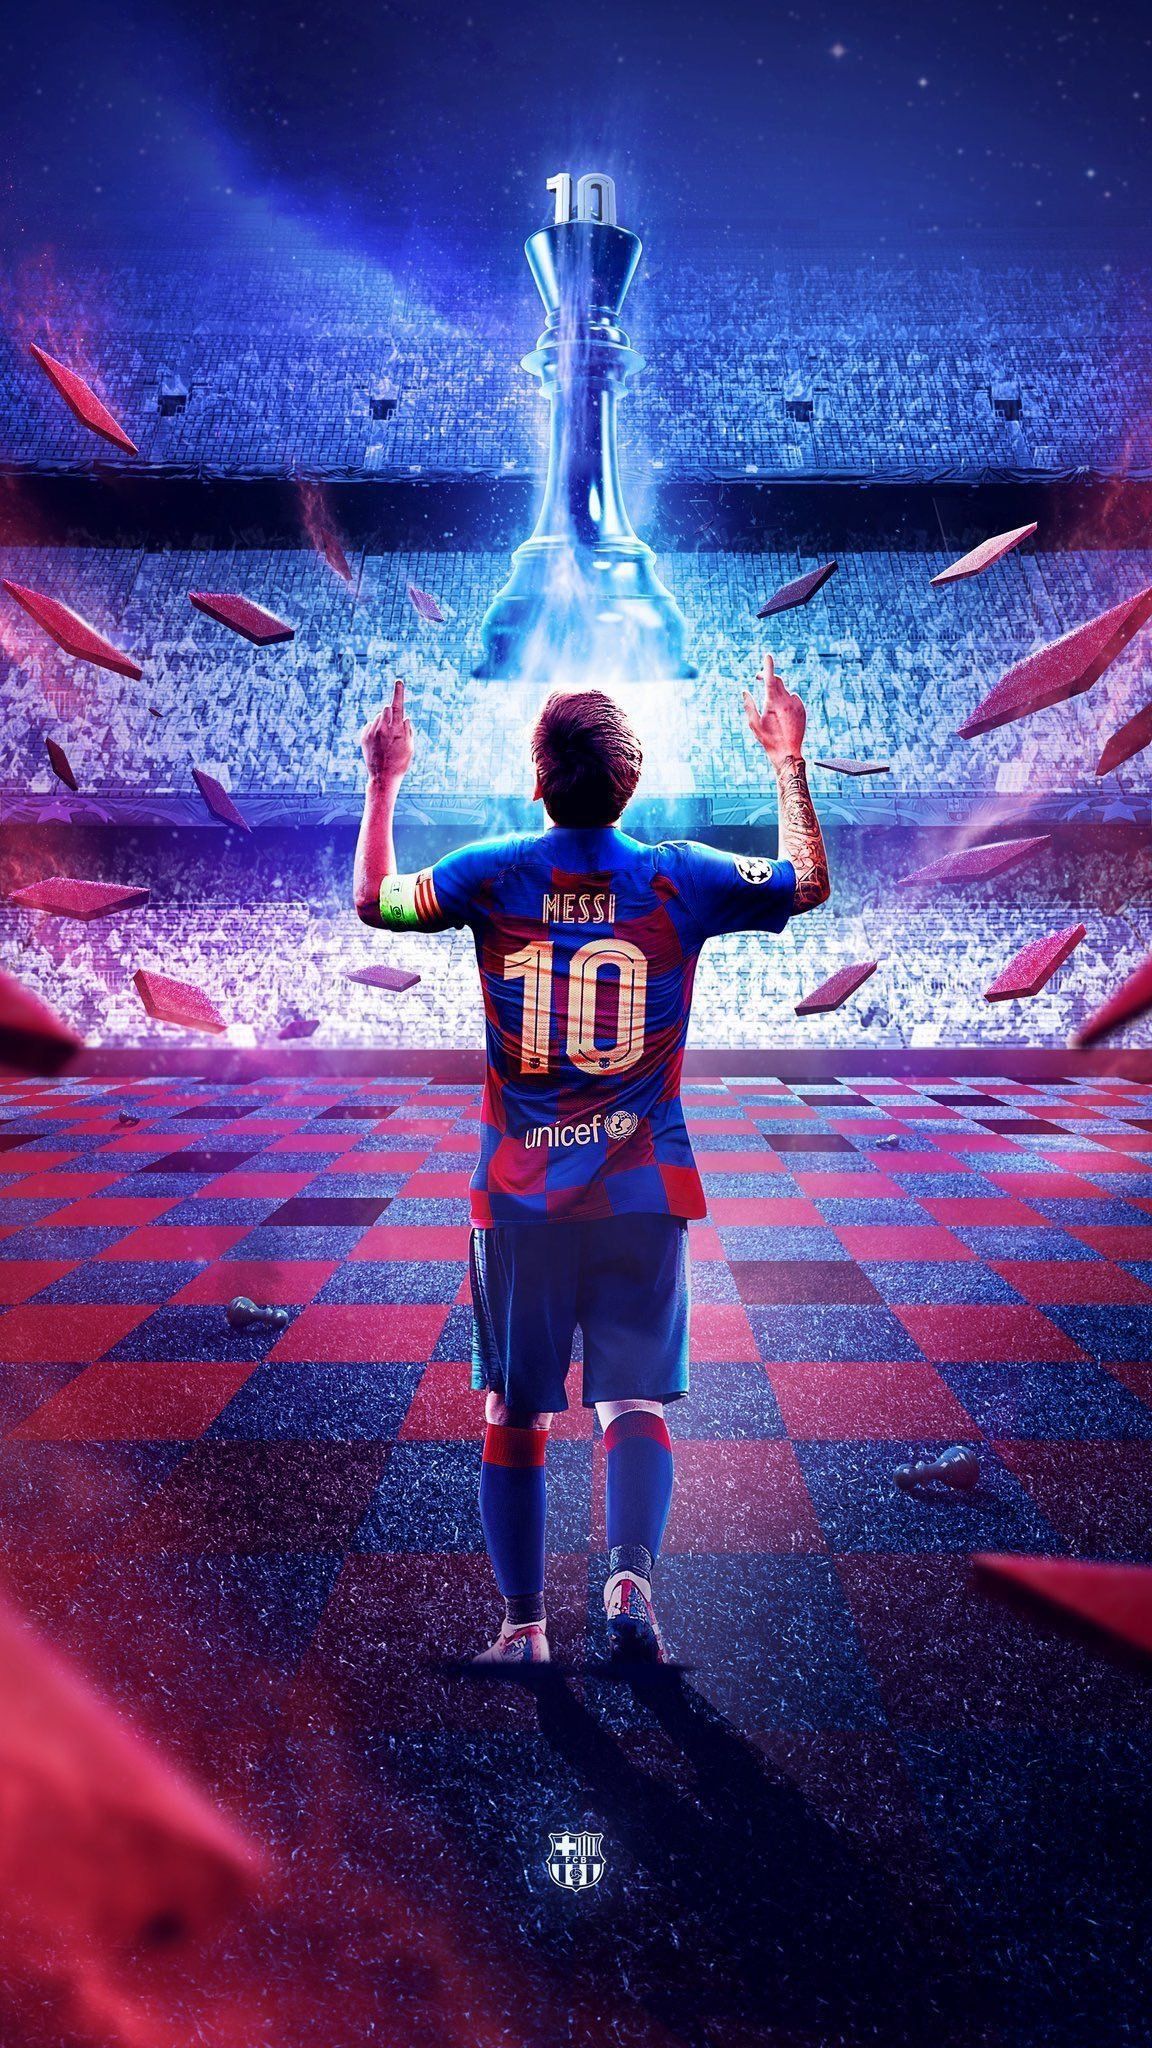 Messi 10 wallpaper for mobiles and tablets - Messi